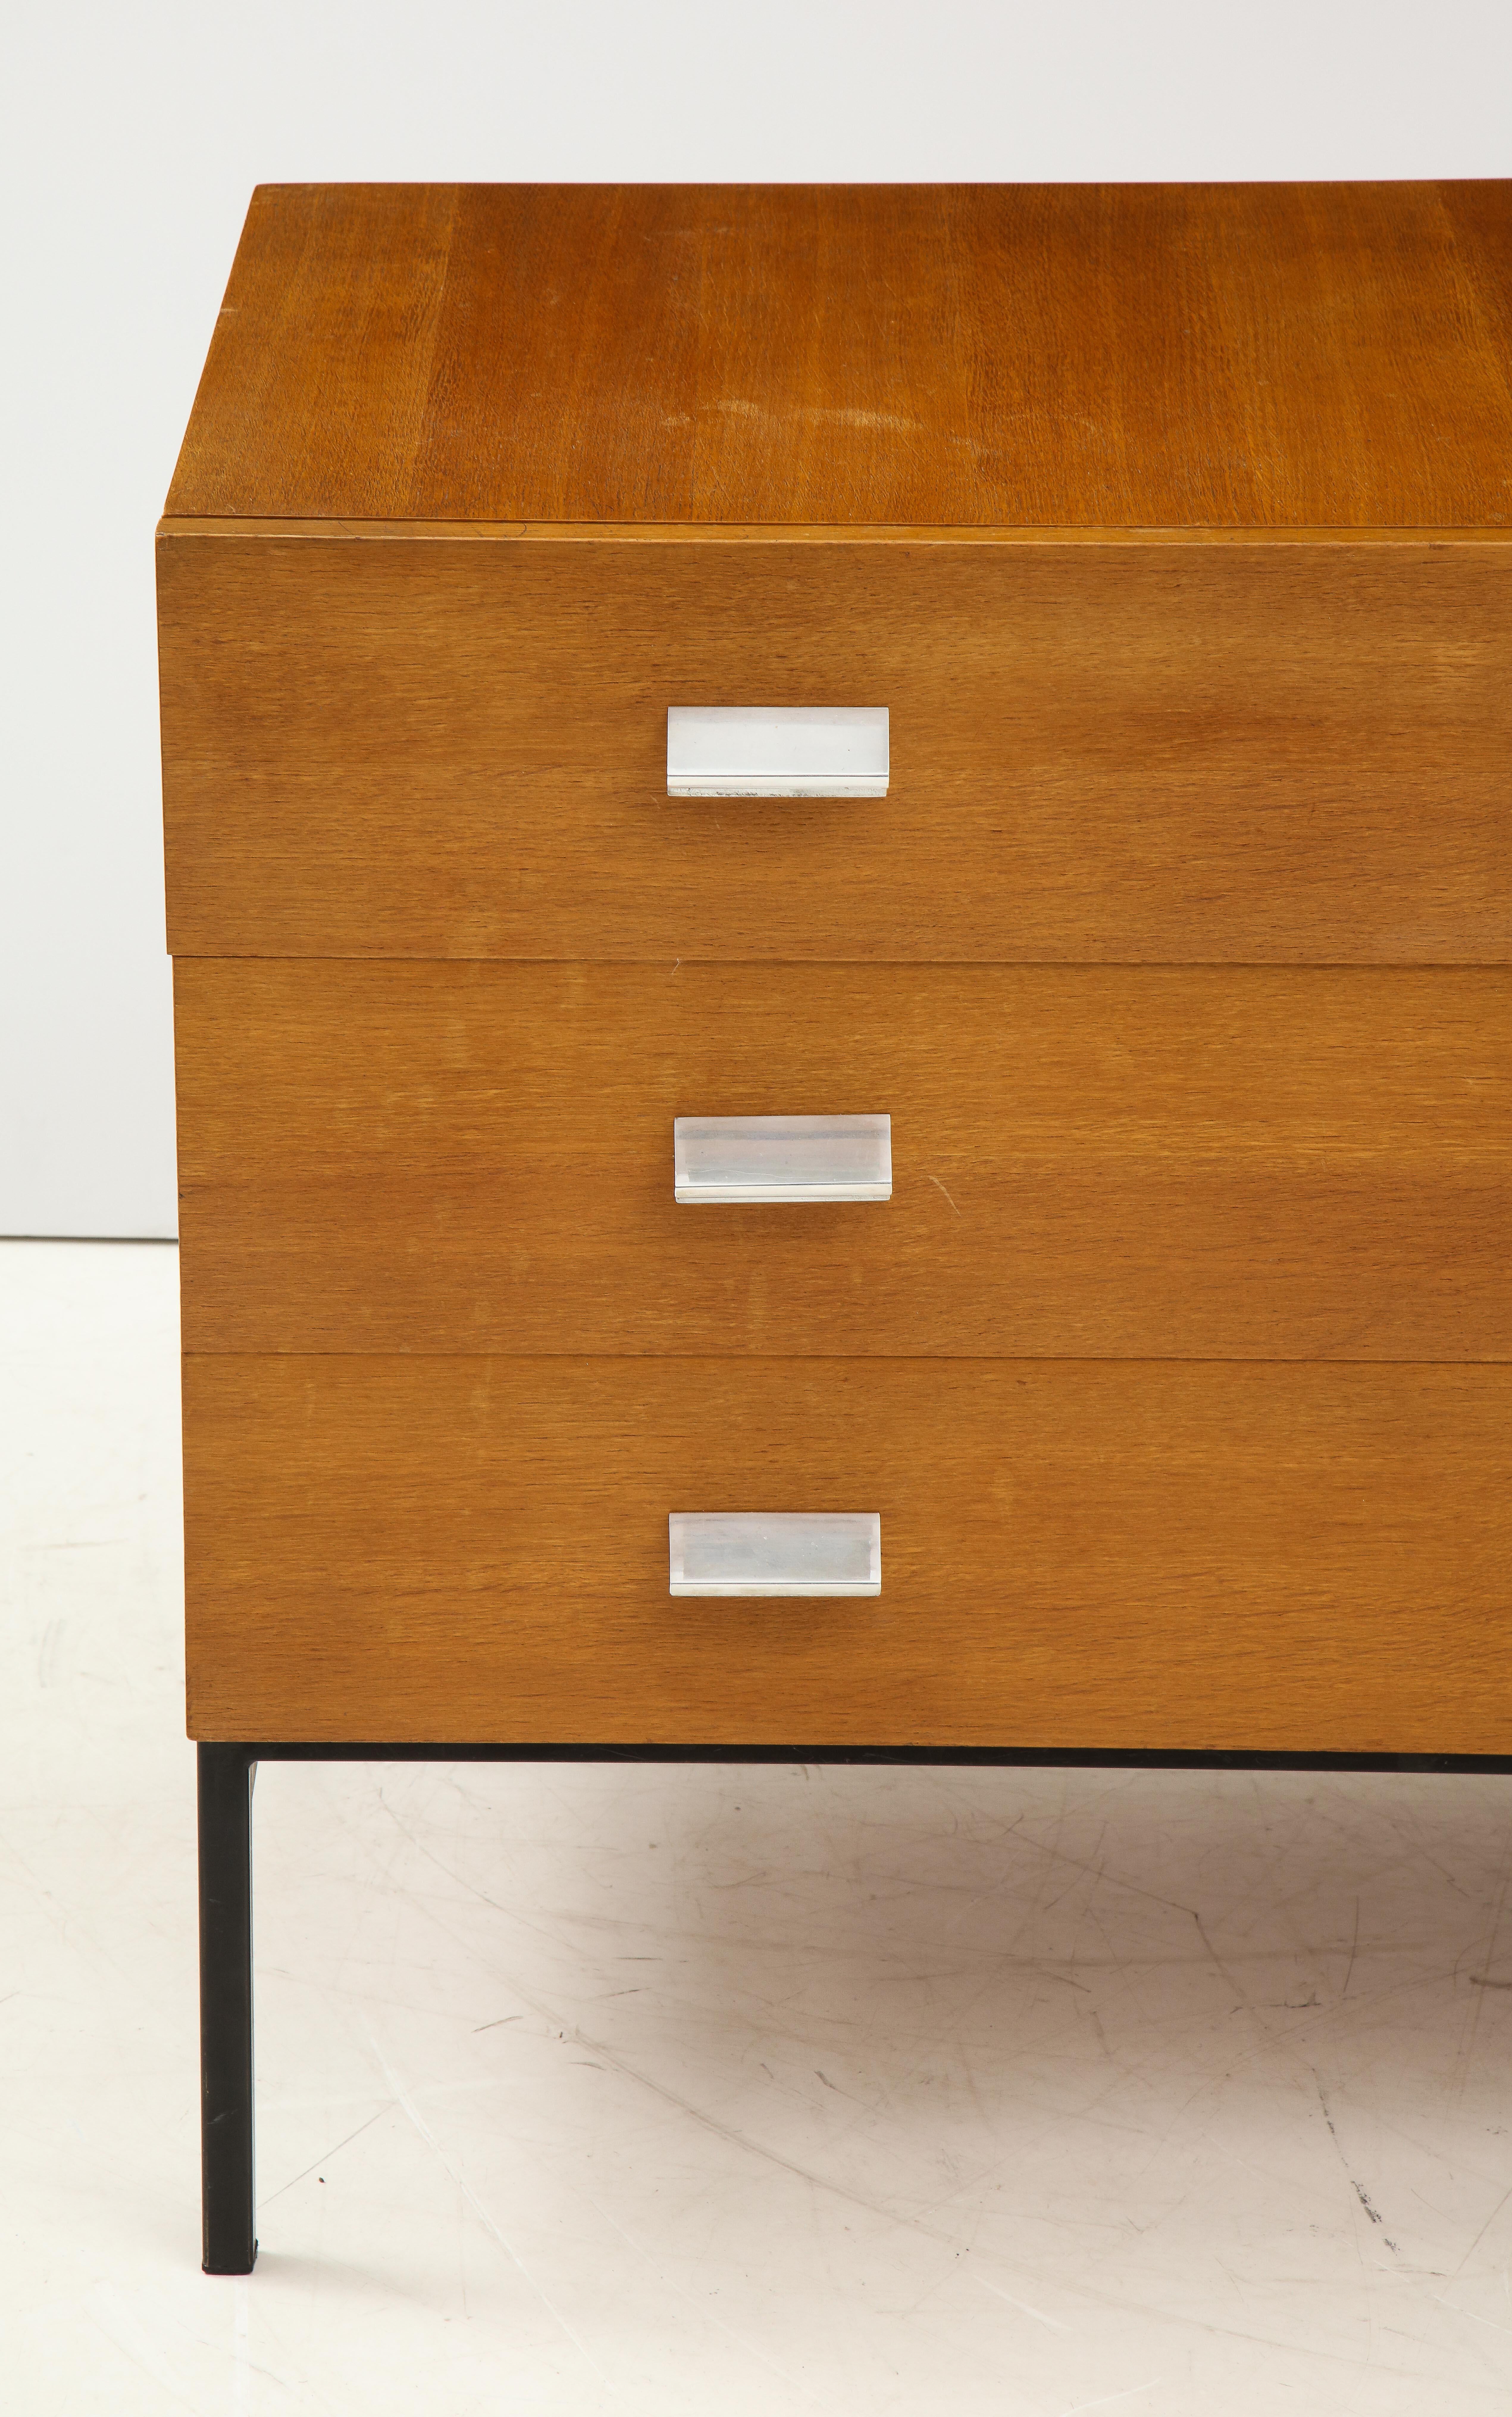 French Rare Model 812 Chest of Drawers by Andre Monpoix, France, c. 1955 For Sale